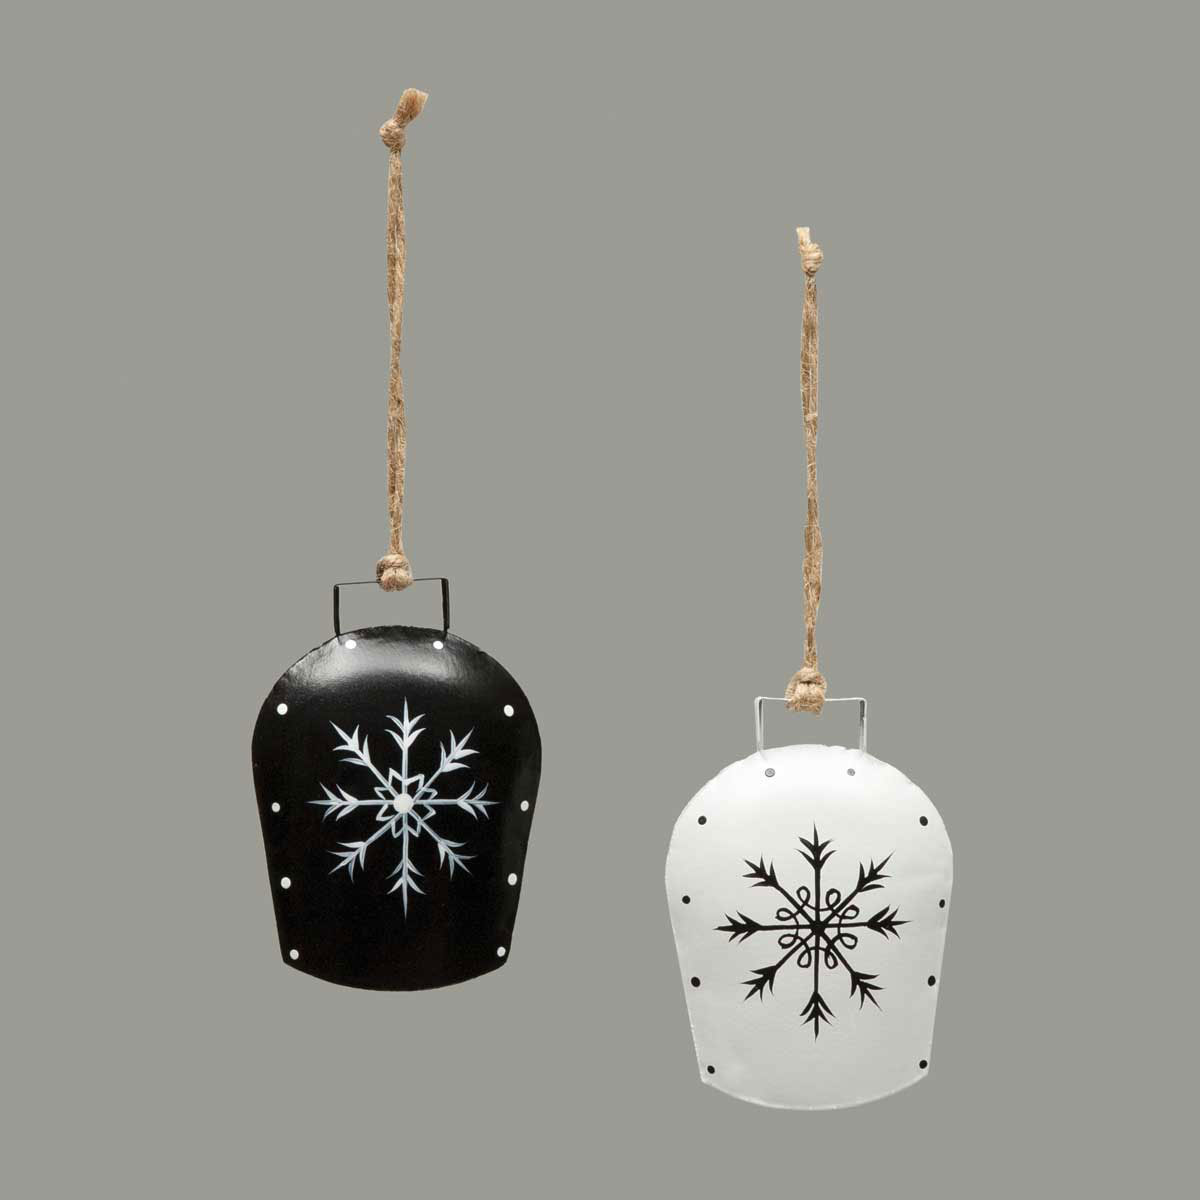 ORNAMENT BELL 2 ASSORTED 2.5IN X 1IN X 3.5IN BLACK/WHITE METAL - Click Image to Close